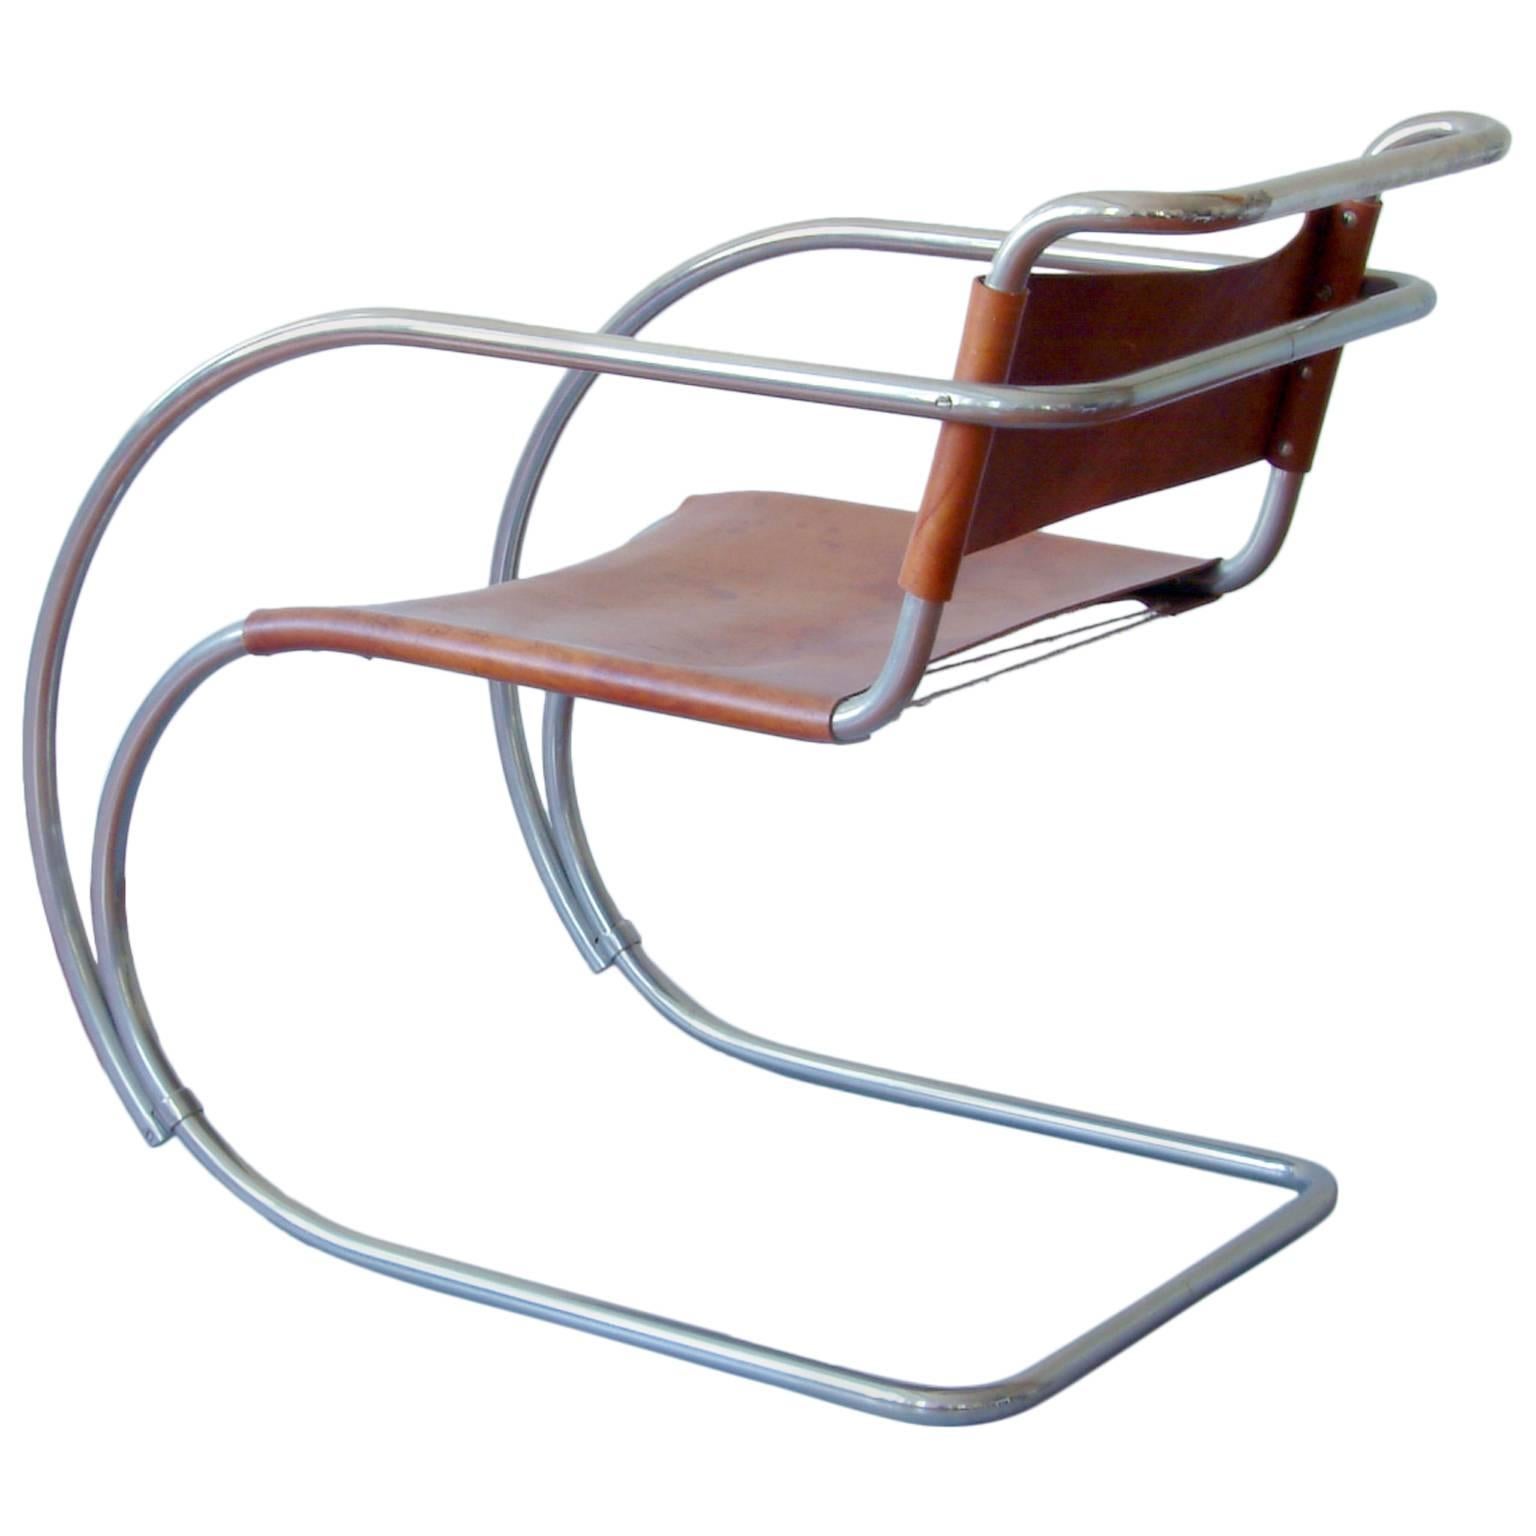 Rare Tubular Steel Cantilever Chair MR 20 by Ludwig Mies van der Rohe, 1927